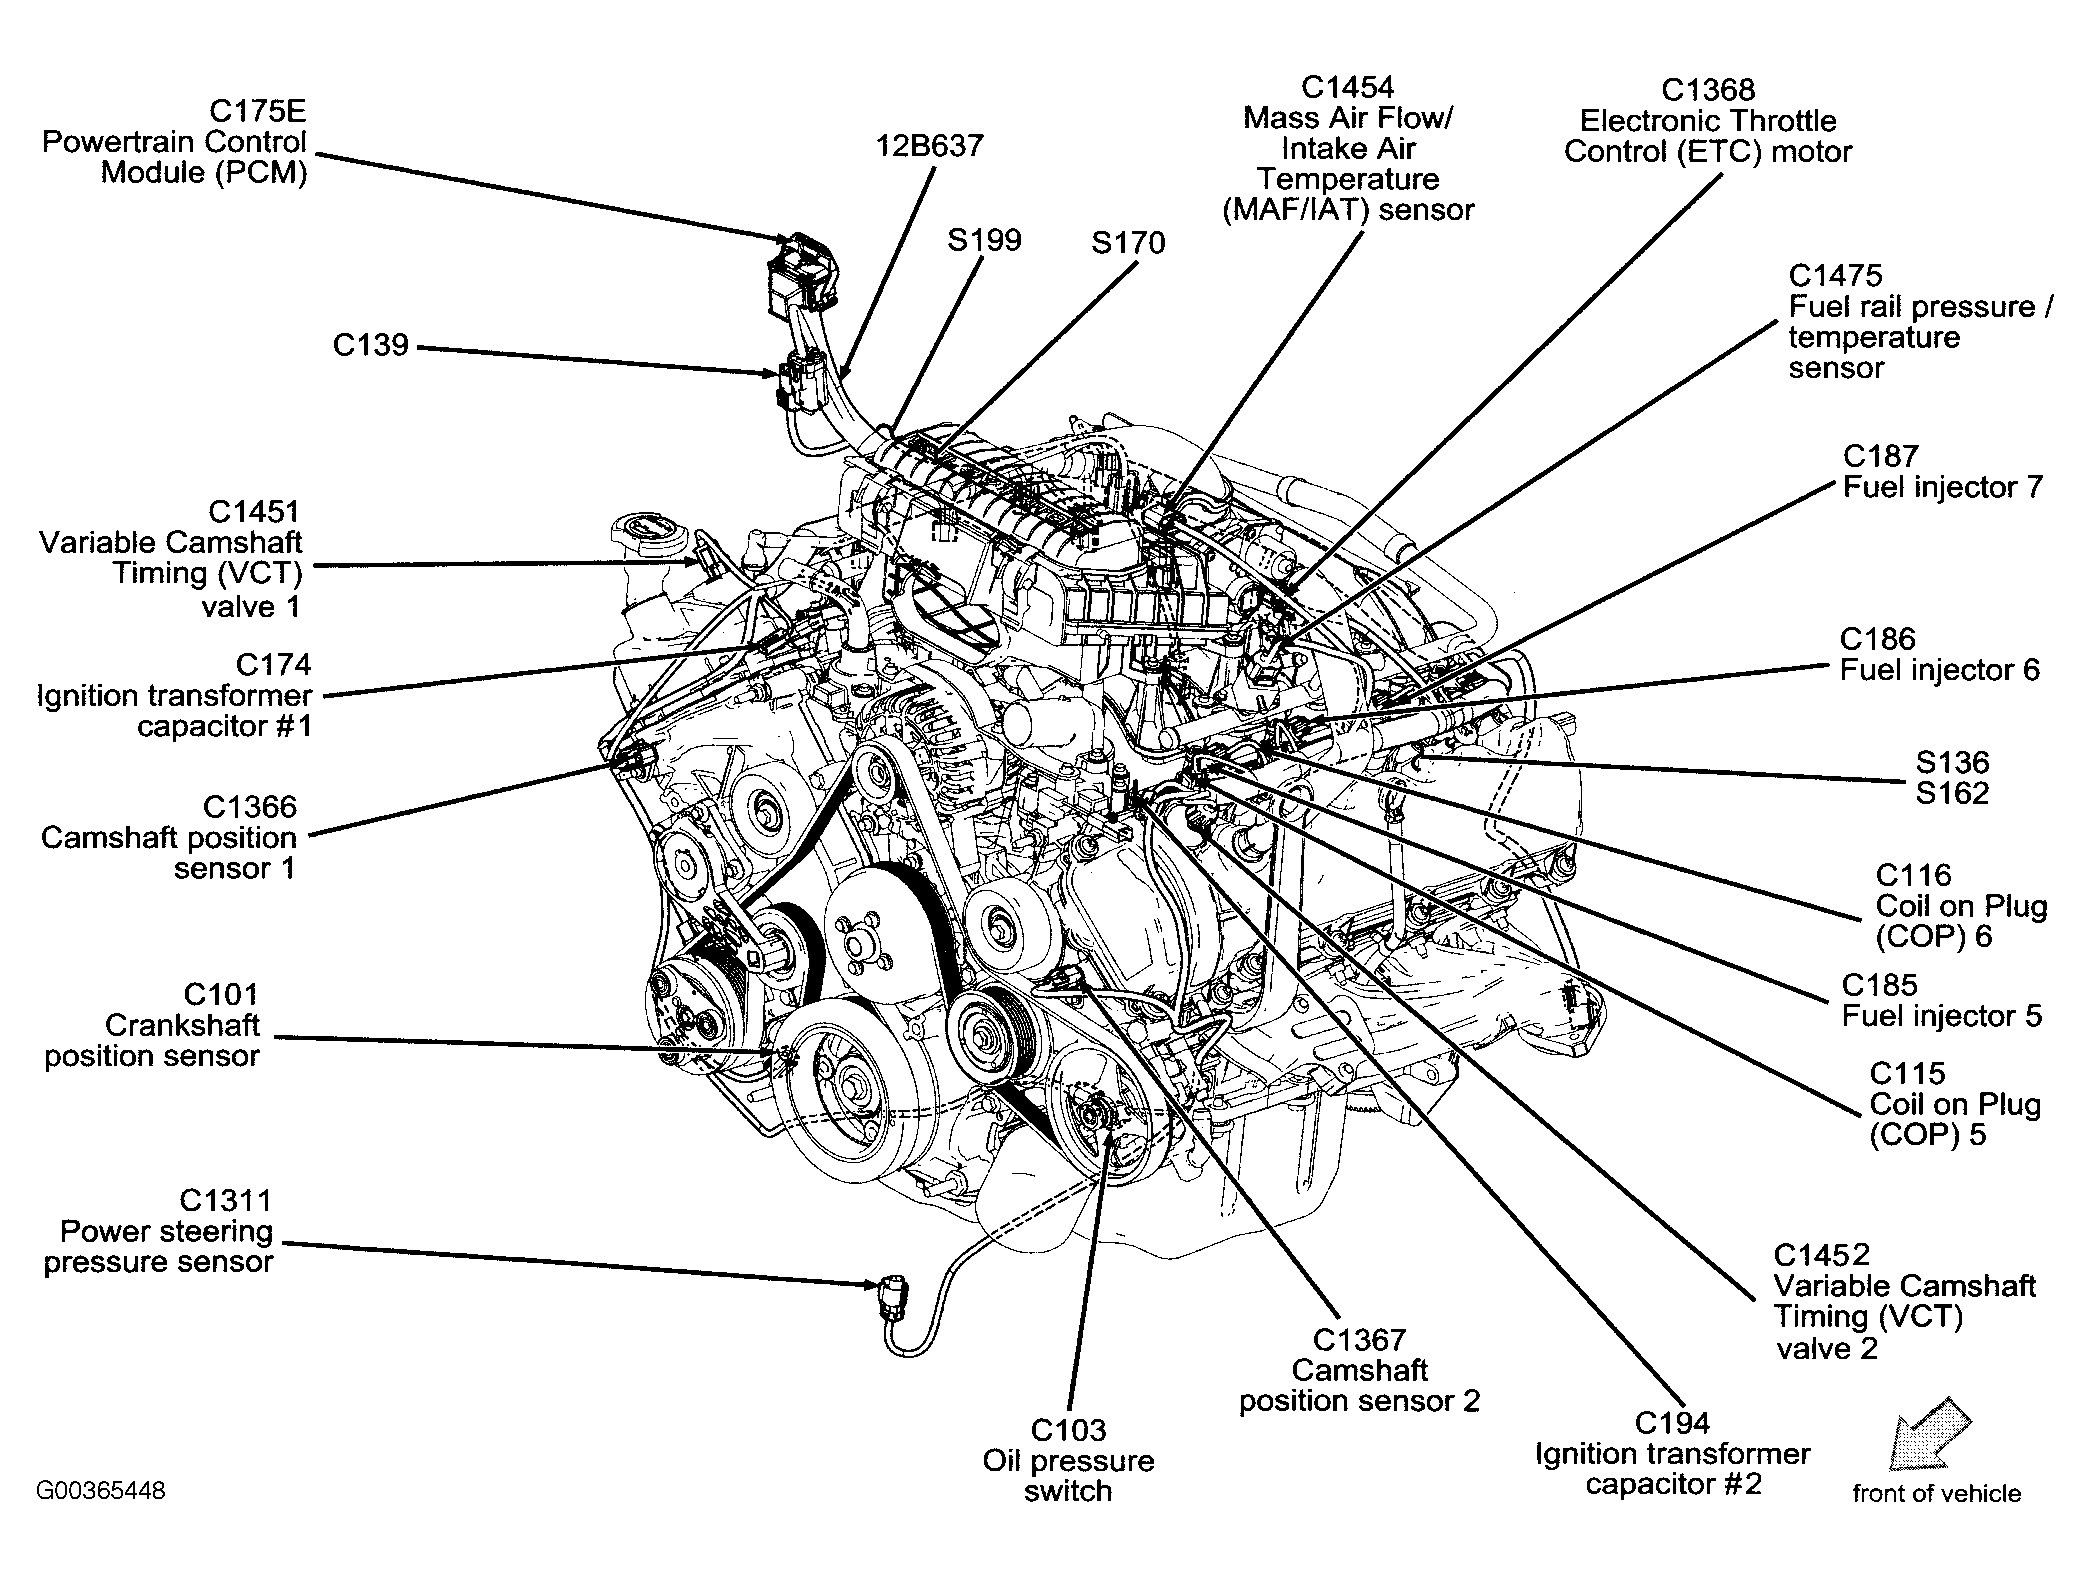 2006 F150 Engine Diagram ford F150 Engine Diagram Another Blog About Wiring Diagram • Of 2006 F150 Engine Diagram